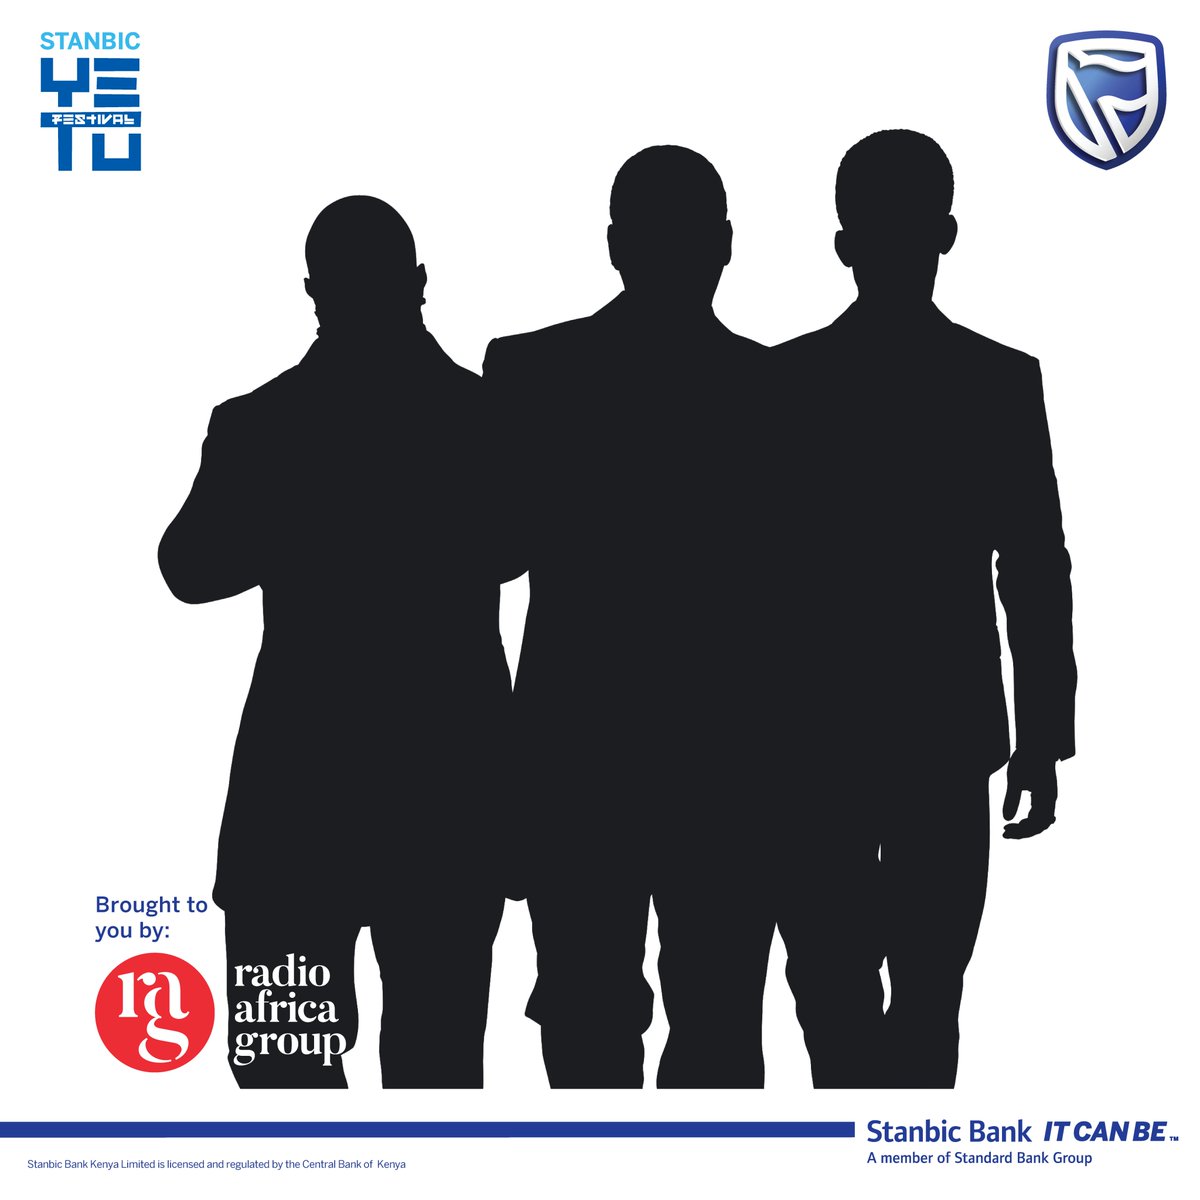 Client : Stanbic Campaign : Stanbic Yetu Festival. Team : SCANAD #WorkThatWorks #TeamAwesome #ProudlySCANAD